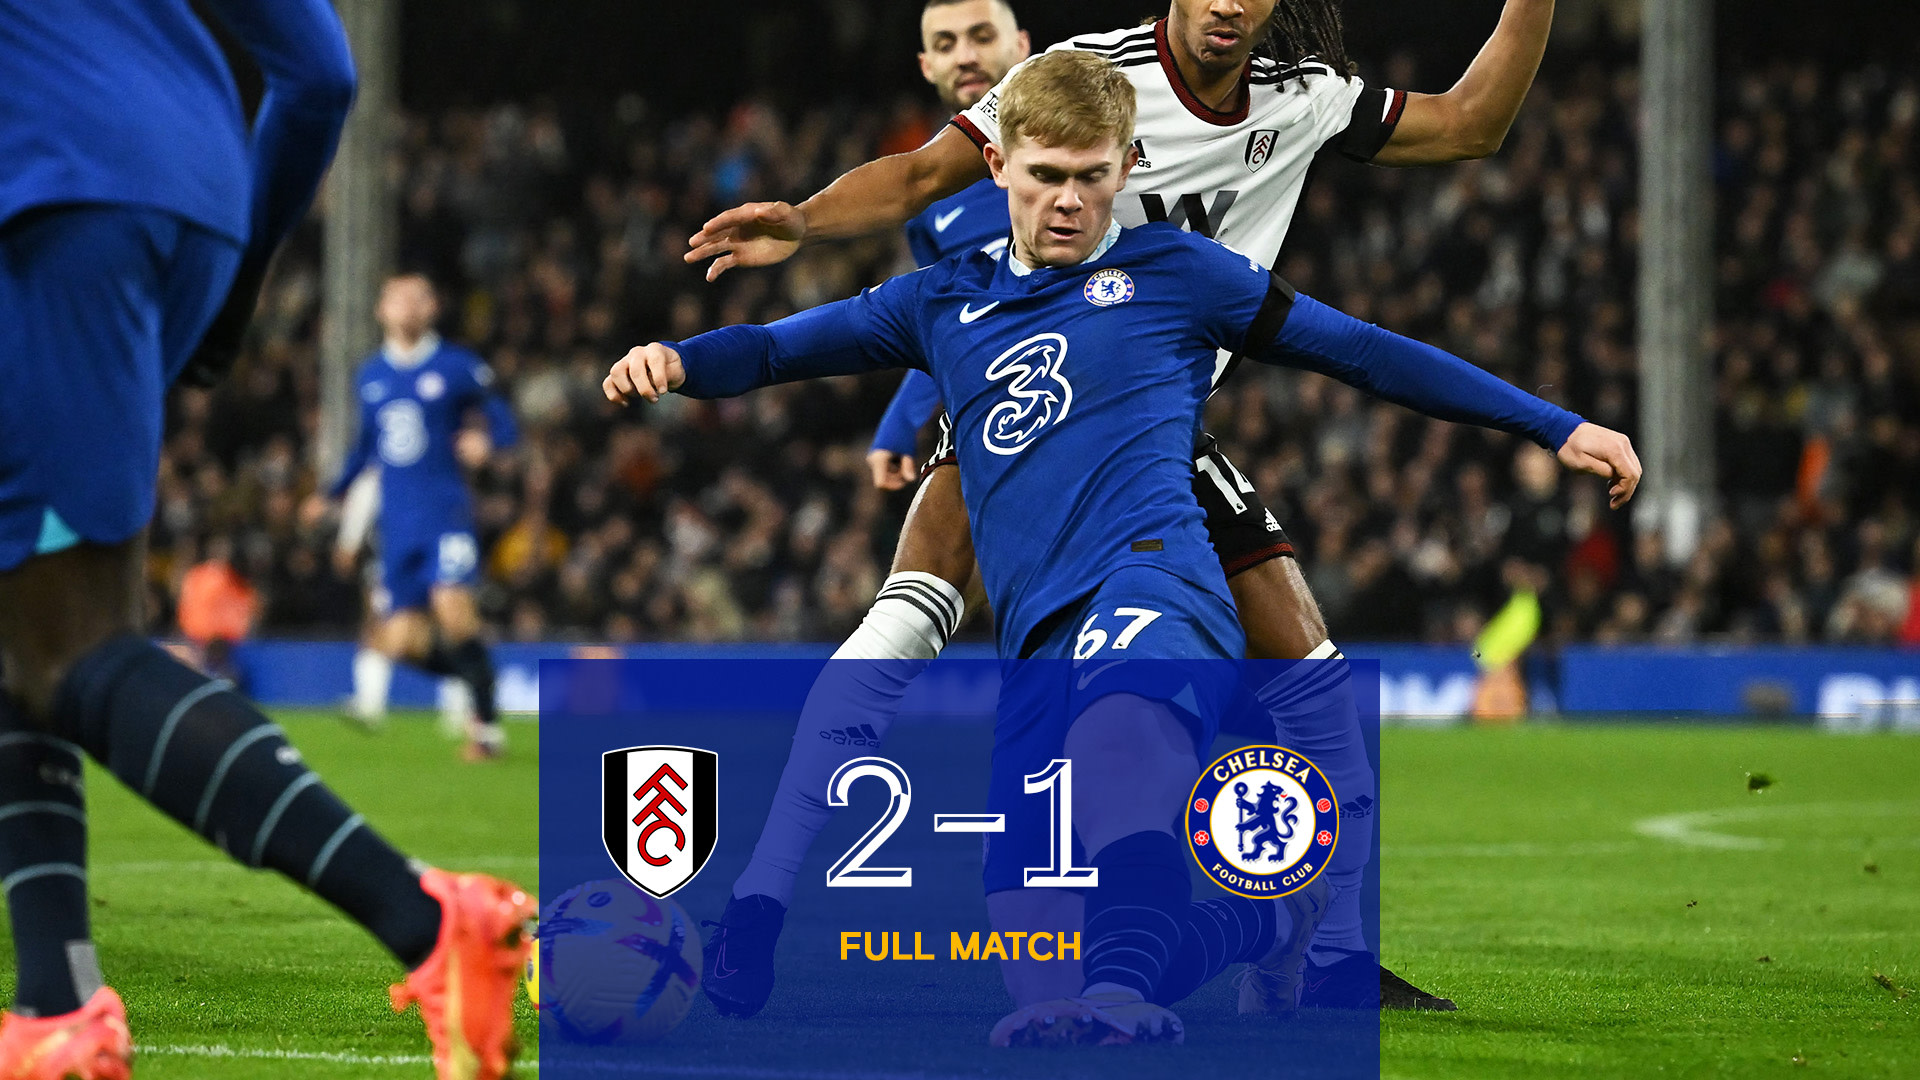 Fulham 2-1 Chelsea Full Match Highlights Video Official Site Chelsea Football Club